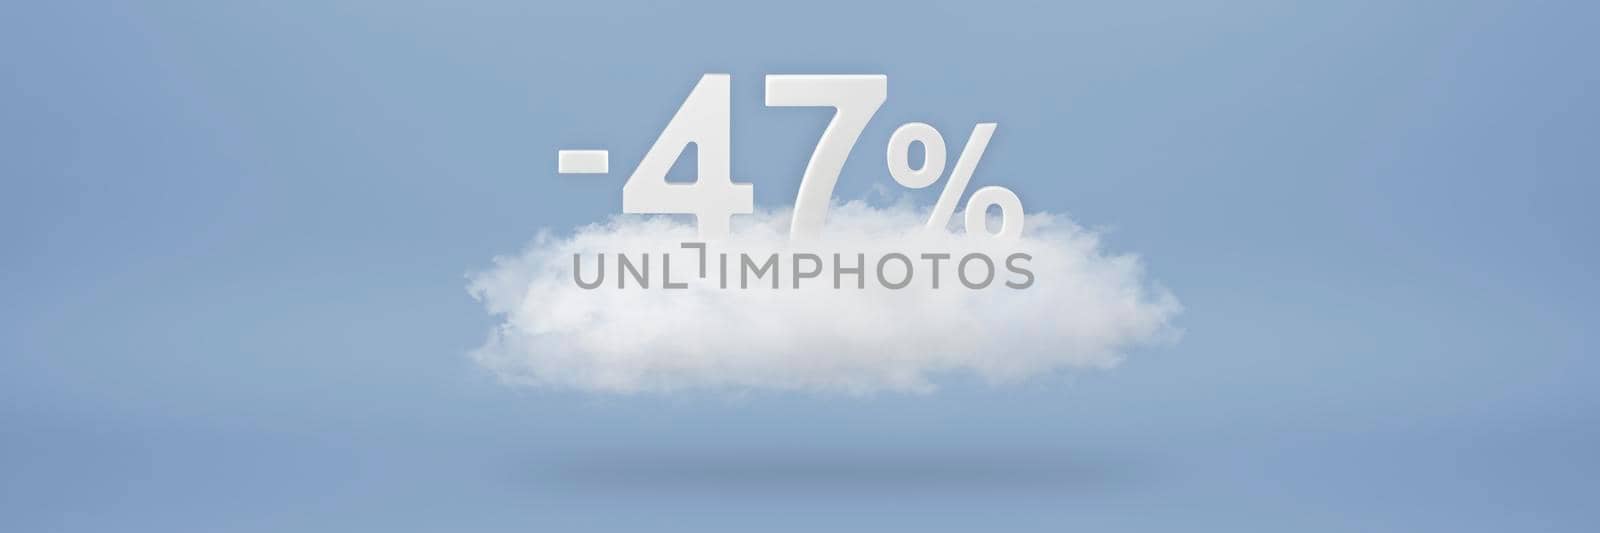 Discount 47 percent. Big discounts, sale up to forty seven percent. 3D numbers float on a cloud on a blue background. Copy space. Advertising banner and poster to be inserted into the project by SERSOL